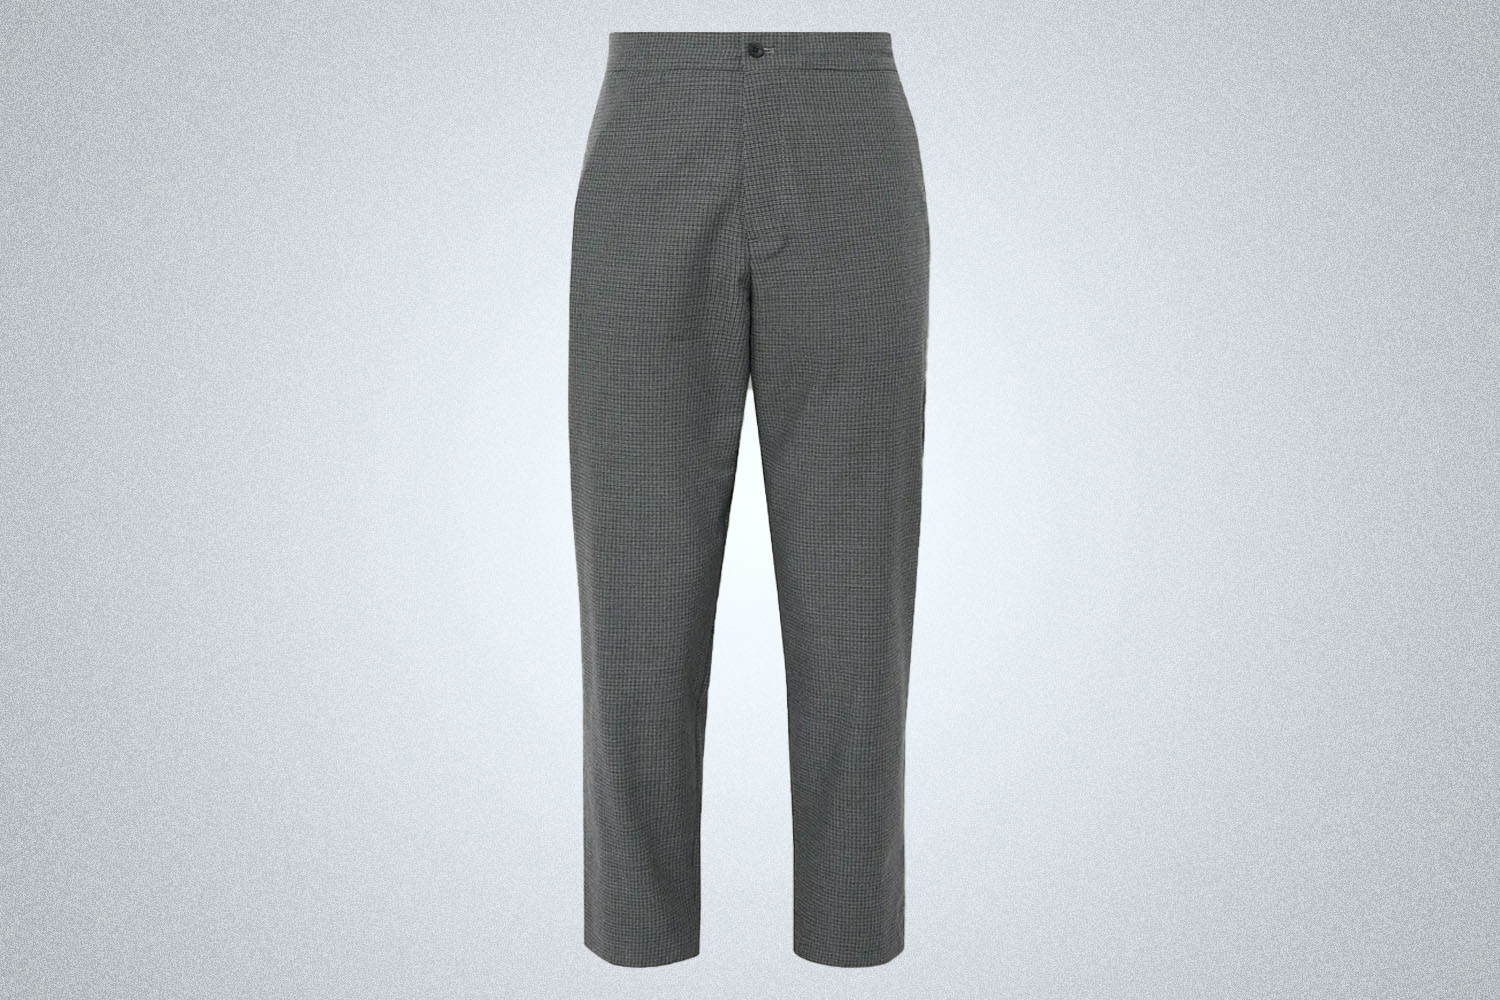 A pair of grey checked dress pants by Mr P. from Mr. Porter on a grey background